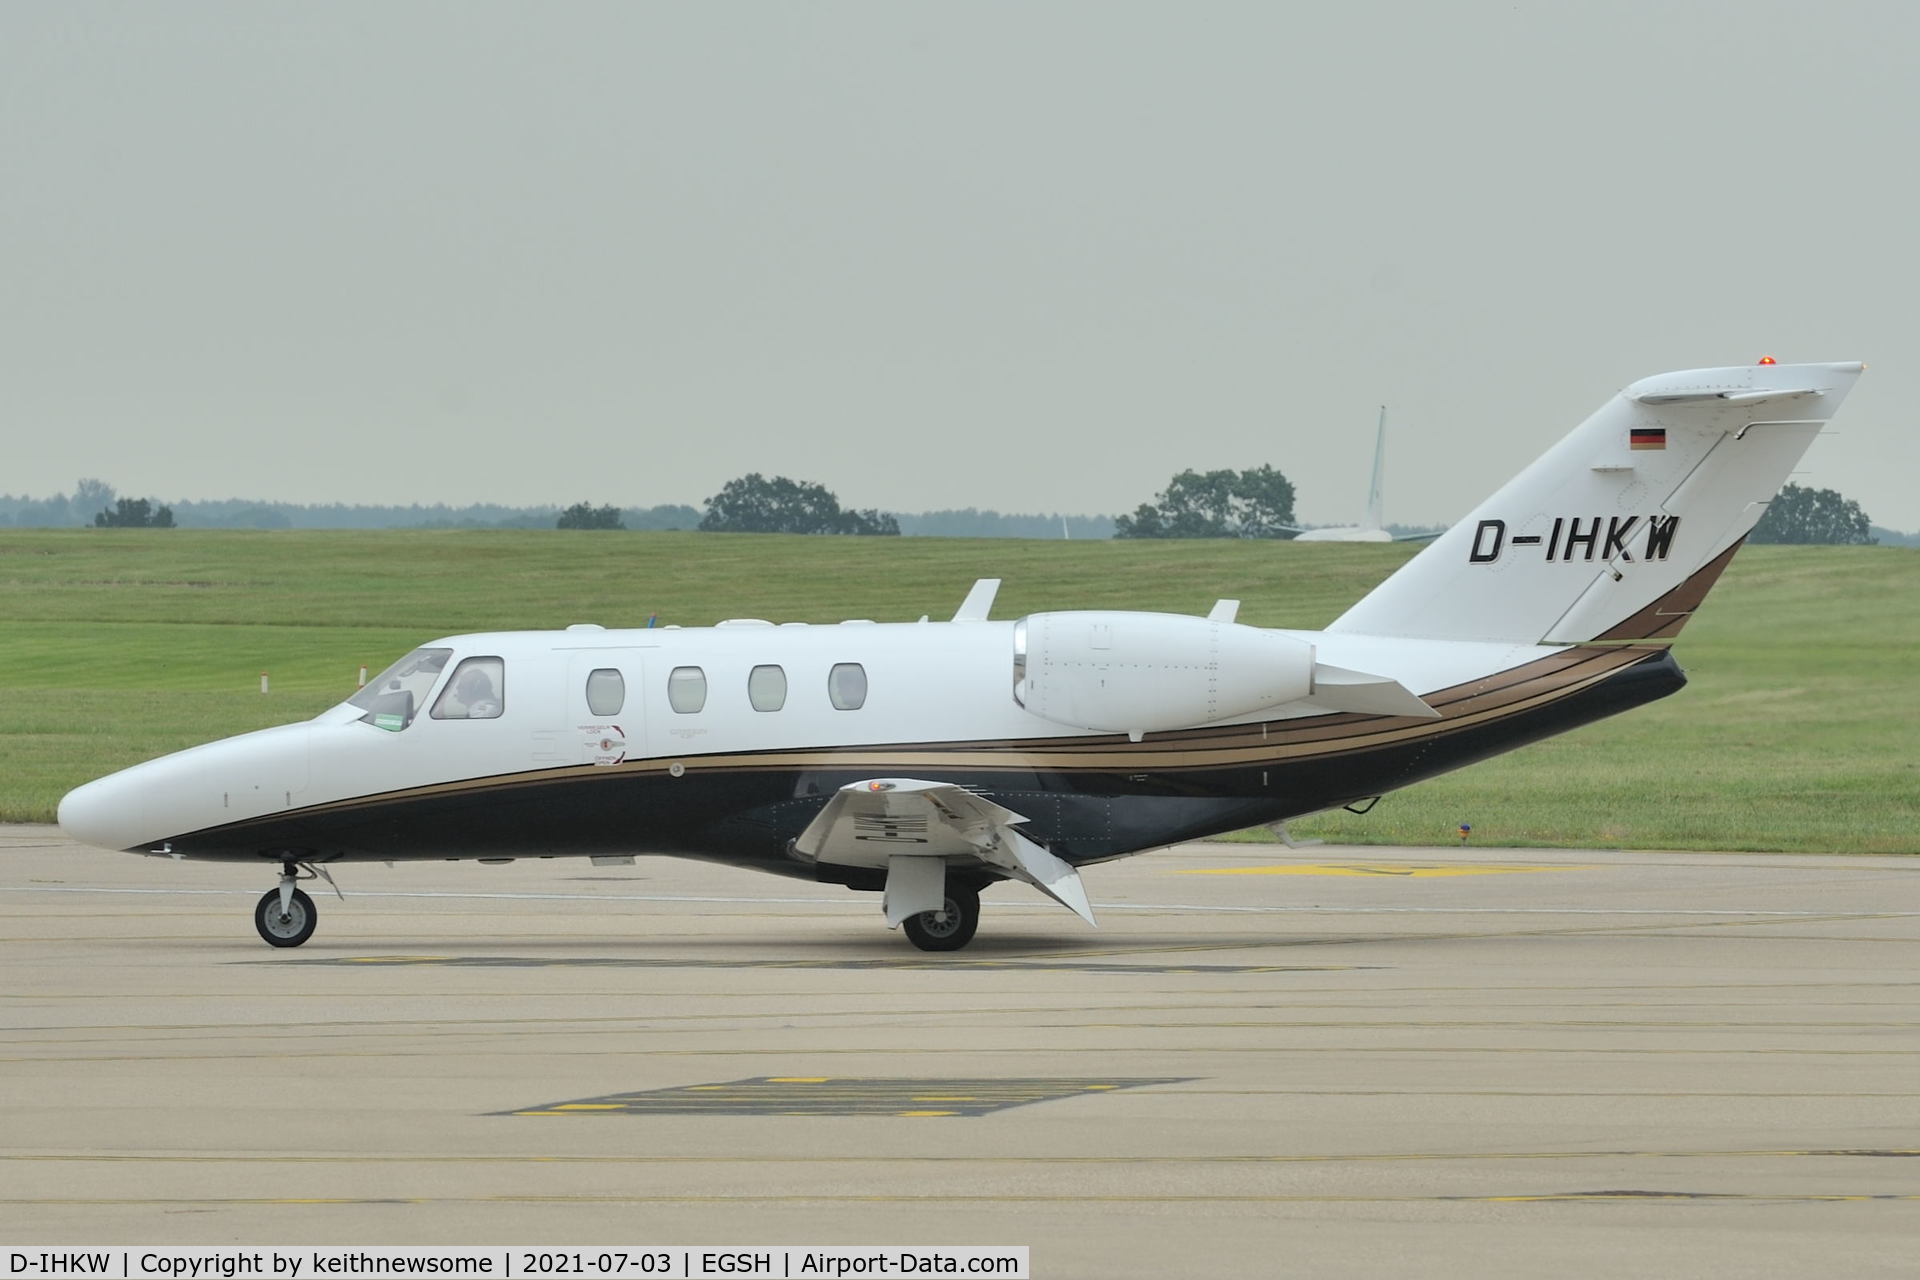 D-IHKW, 2008 Cessna 525 CitationJet CJ1+ C/N 525-0677, Arriving at Norwich from Germany.